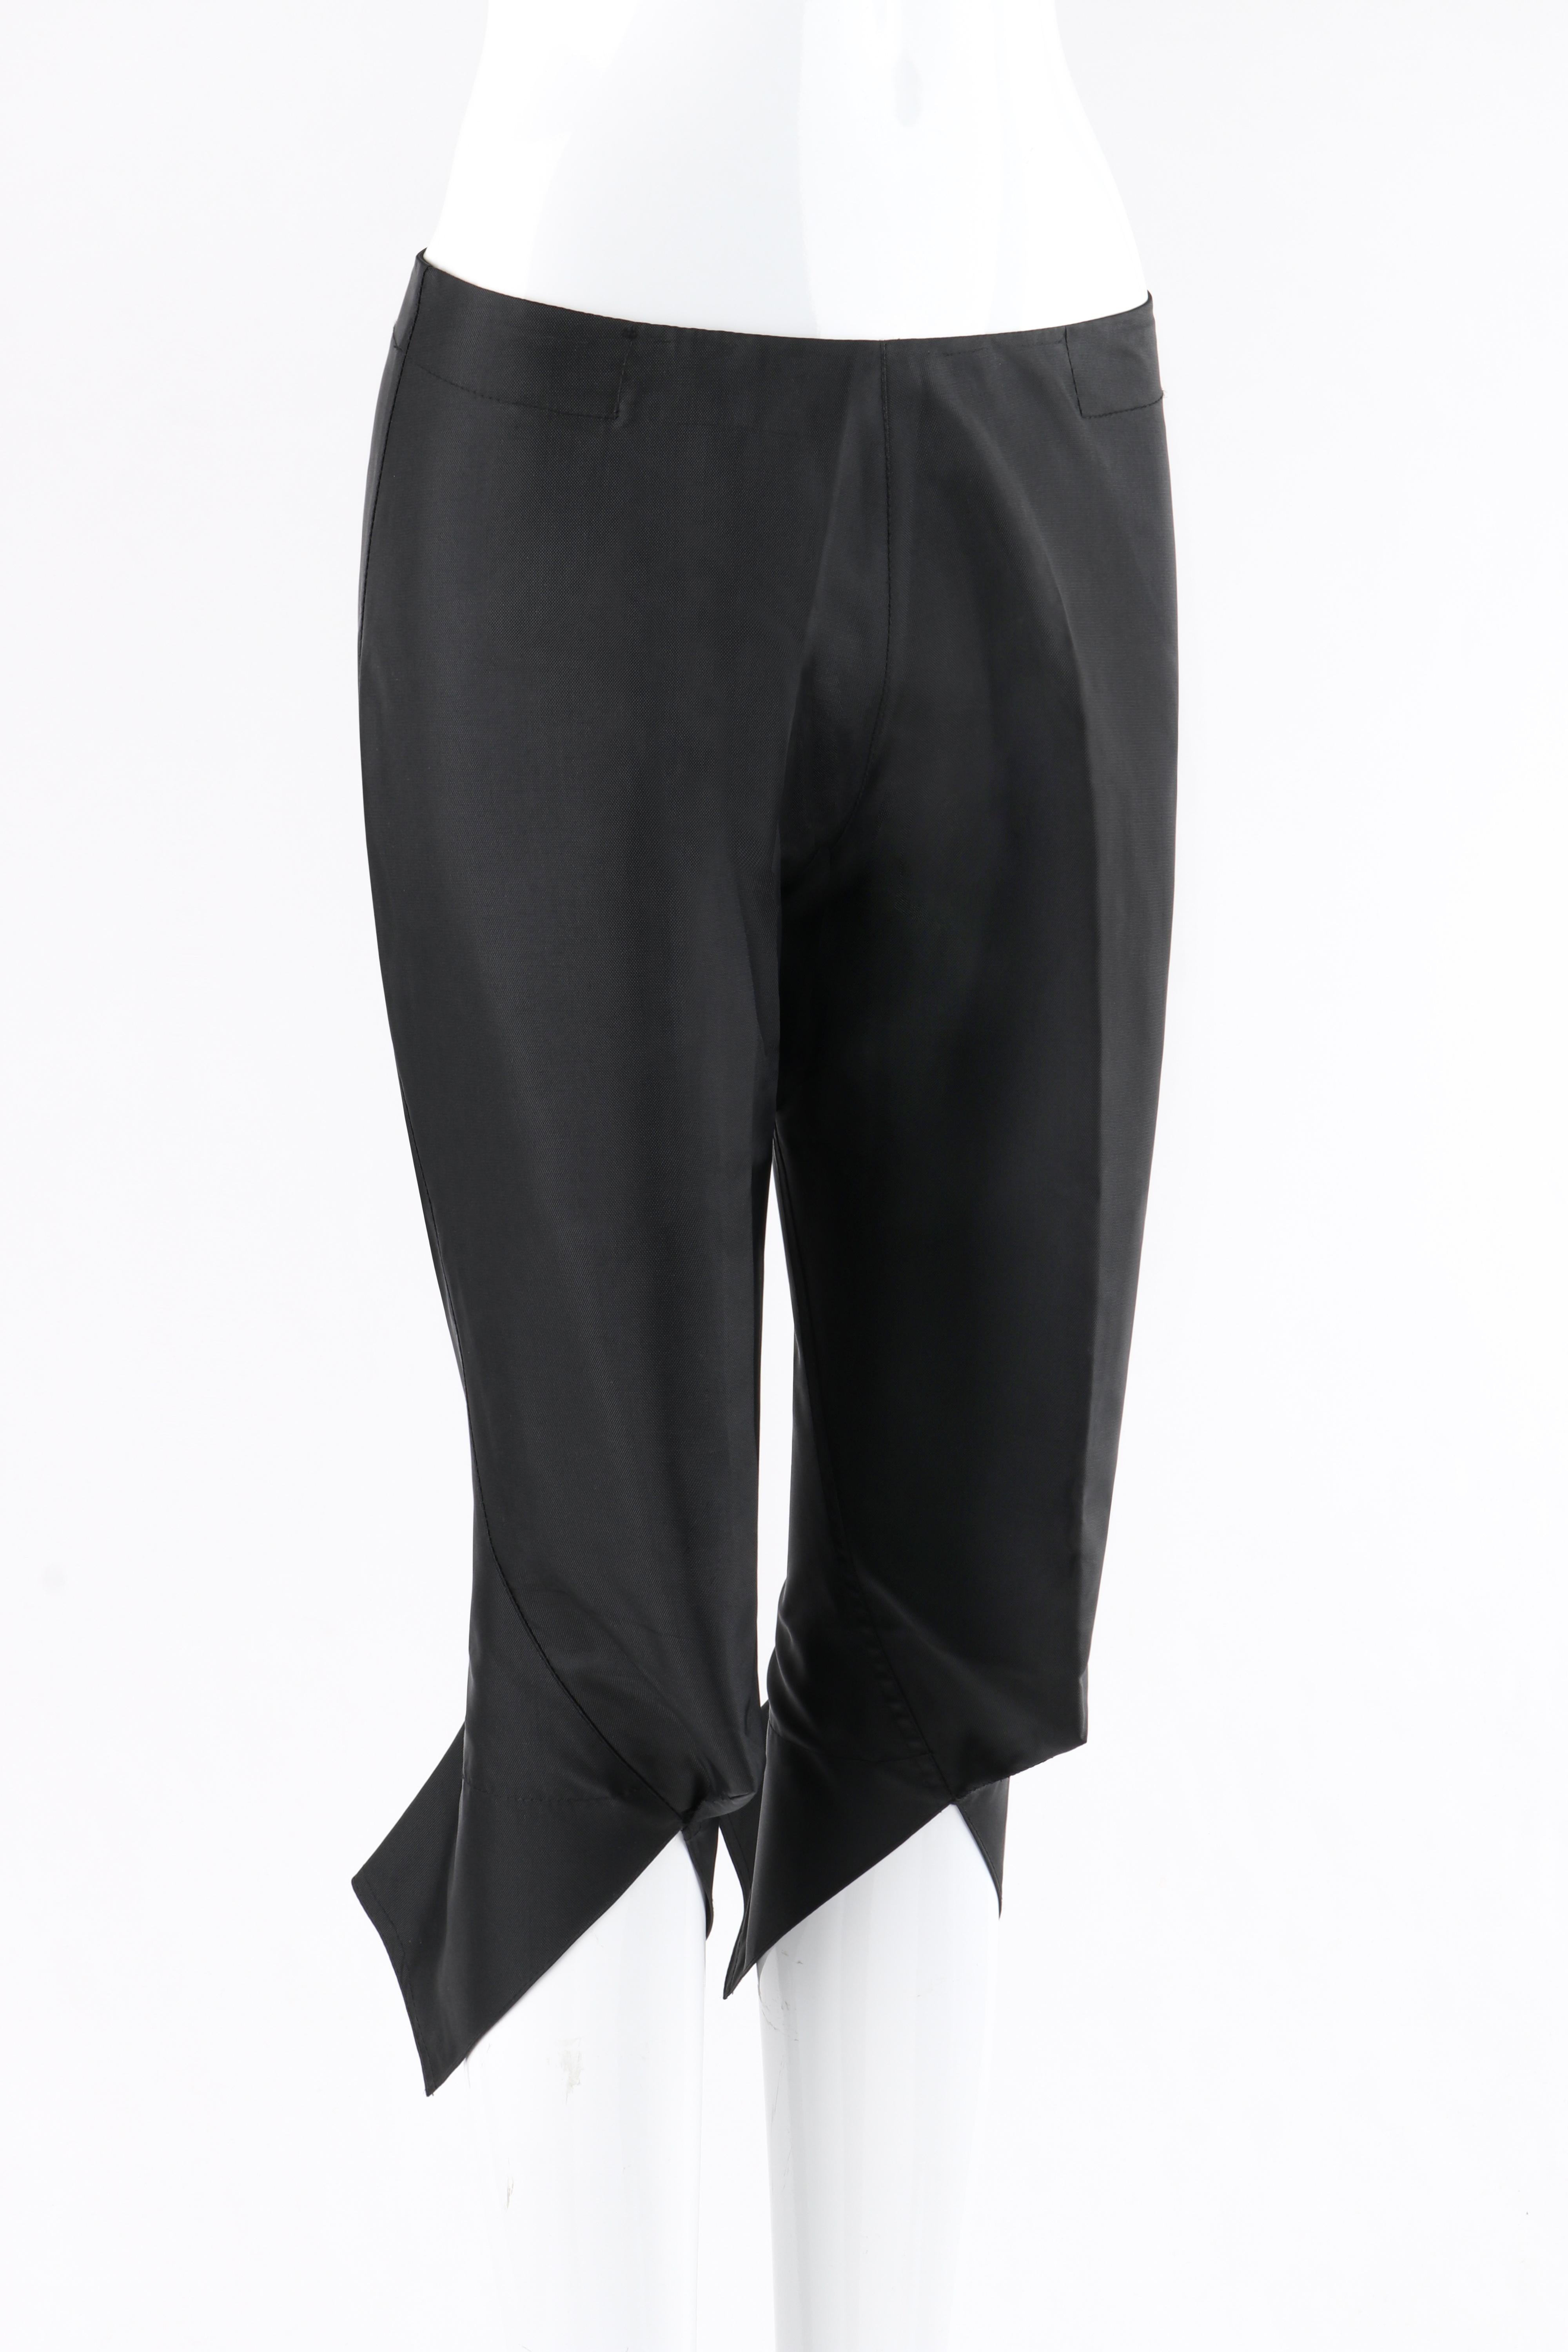 OWEN GASTER c.1996 “Grasshopper” Black Cropped Structured Knicker Trouser Pants

Brand / Manufacturer: Owen Gaster
Circa: 1996
Designer: Owen Gaster
Style: Tailored capri pants
Color(s): Black
Lined: No
Unmarked Fabric Content (feel of): Nylon;